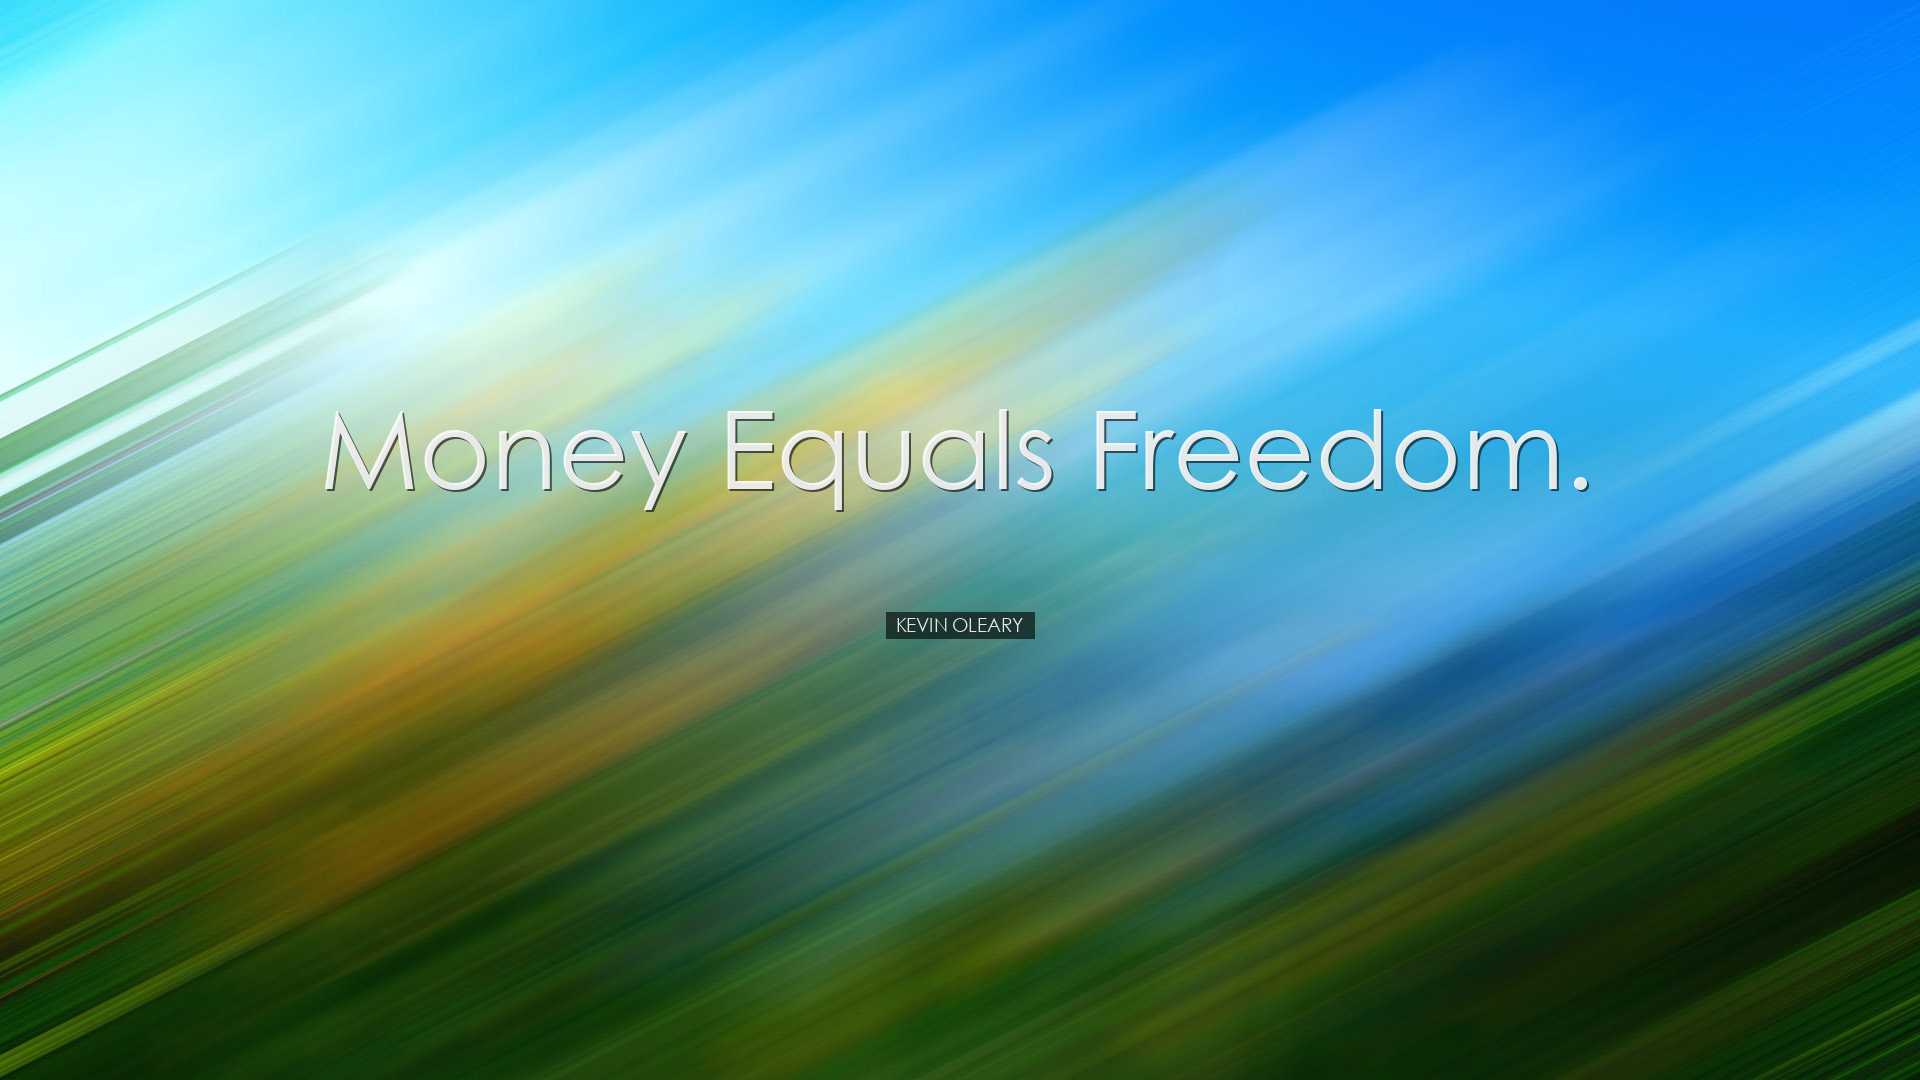 Money equals freedom. - Kevin OLeary